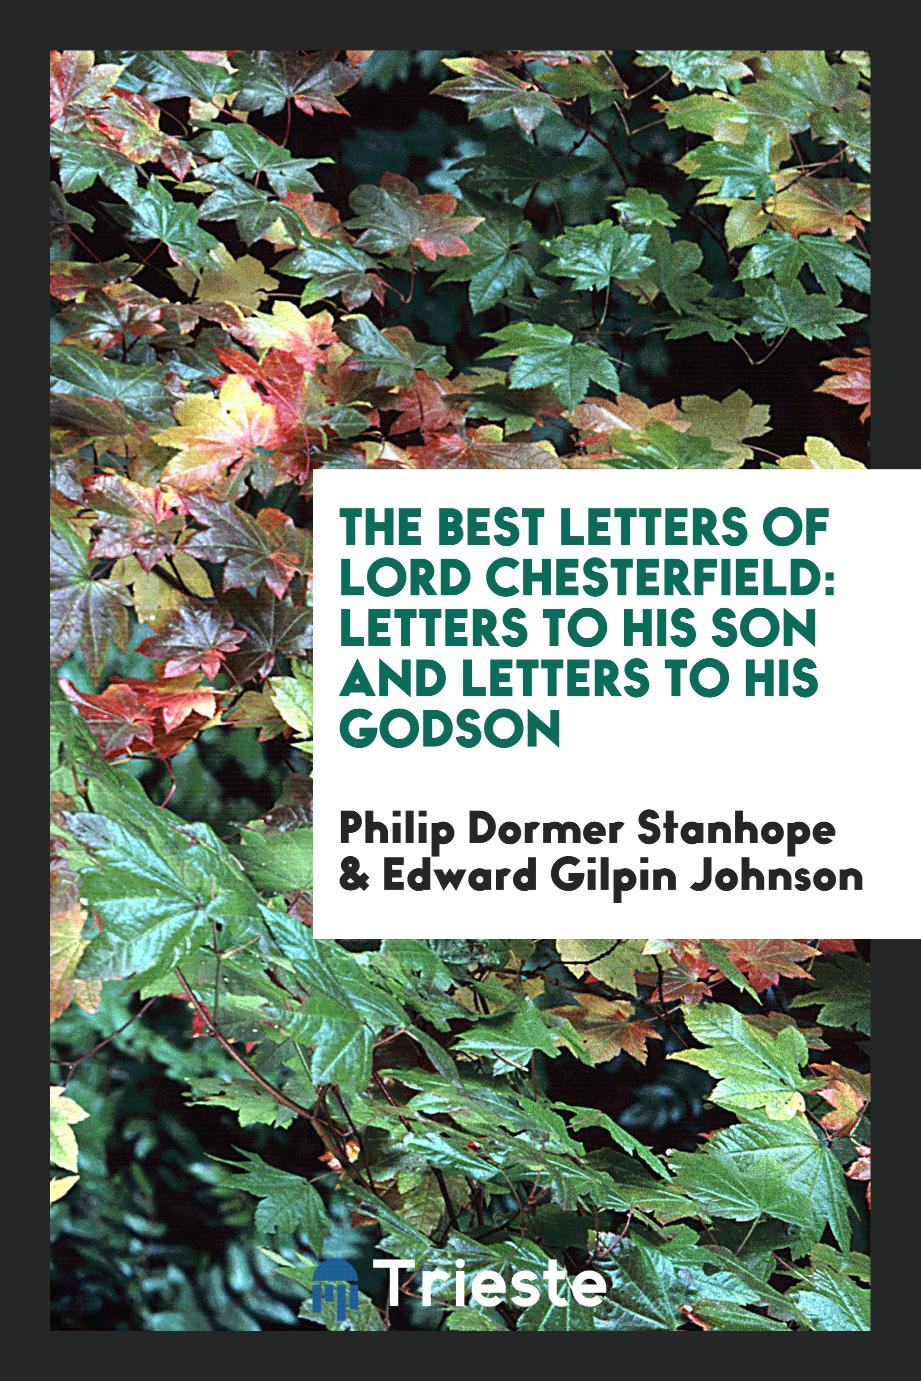 The Best Letters of Lord Chesterfield: Letters to His Son and Letters to His Godson